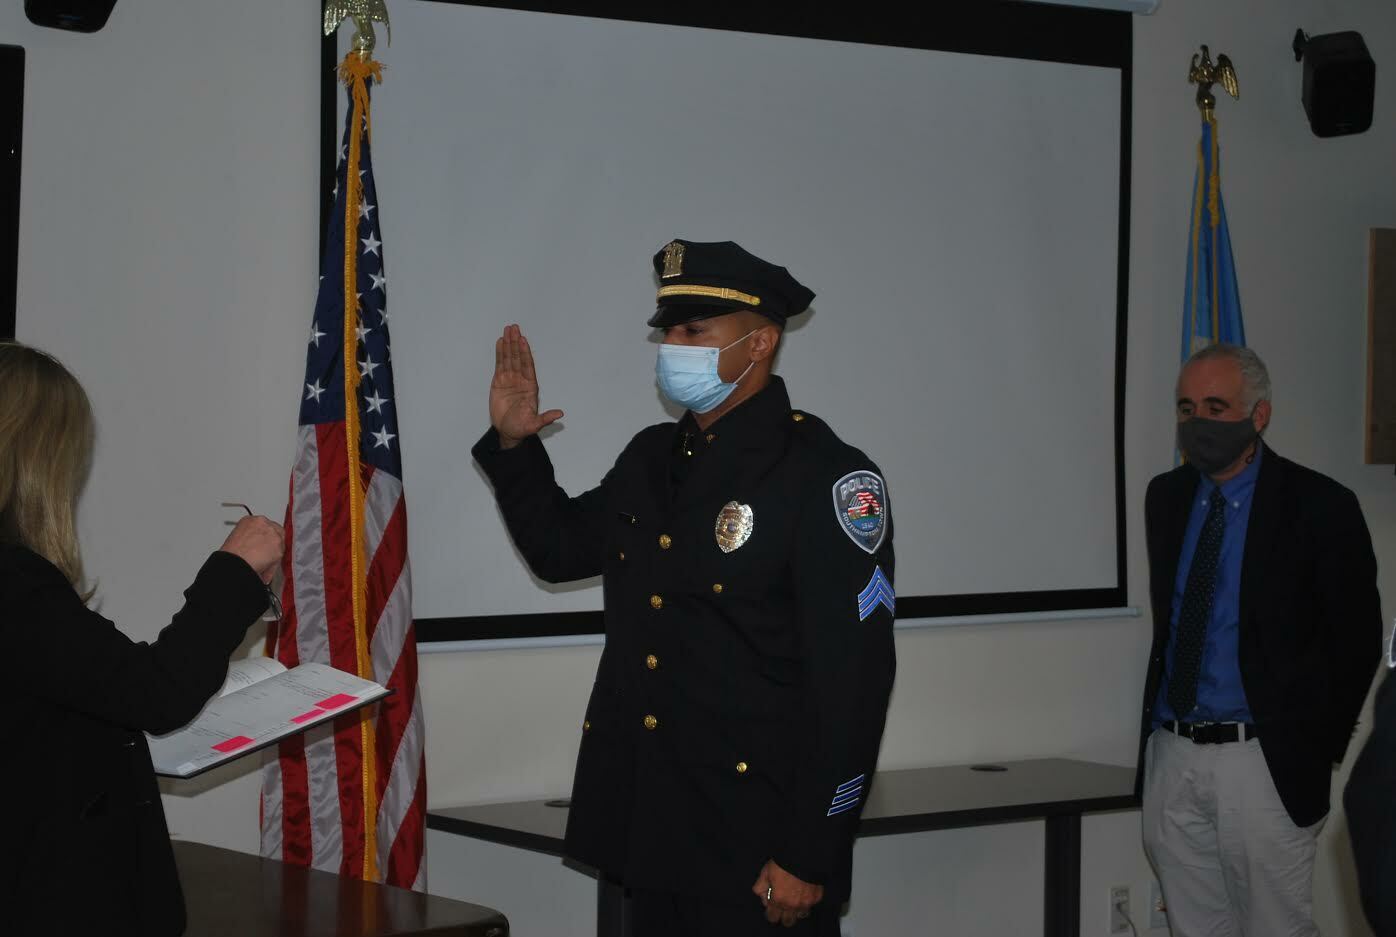 Sherekhan Parker made history December 1, as he was sworn in Southampton Town Police Sergeant, the first African American in the department to achieve the rank. COURTESY STPD